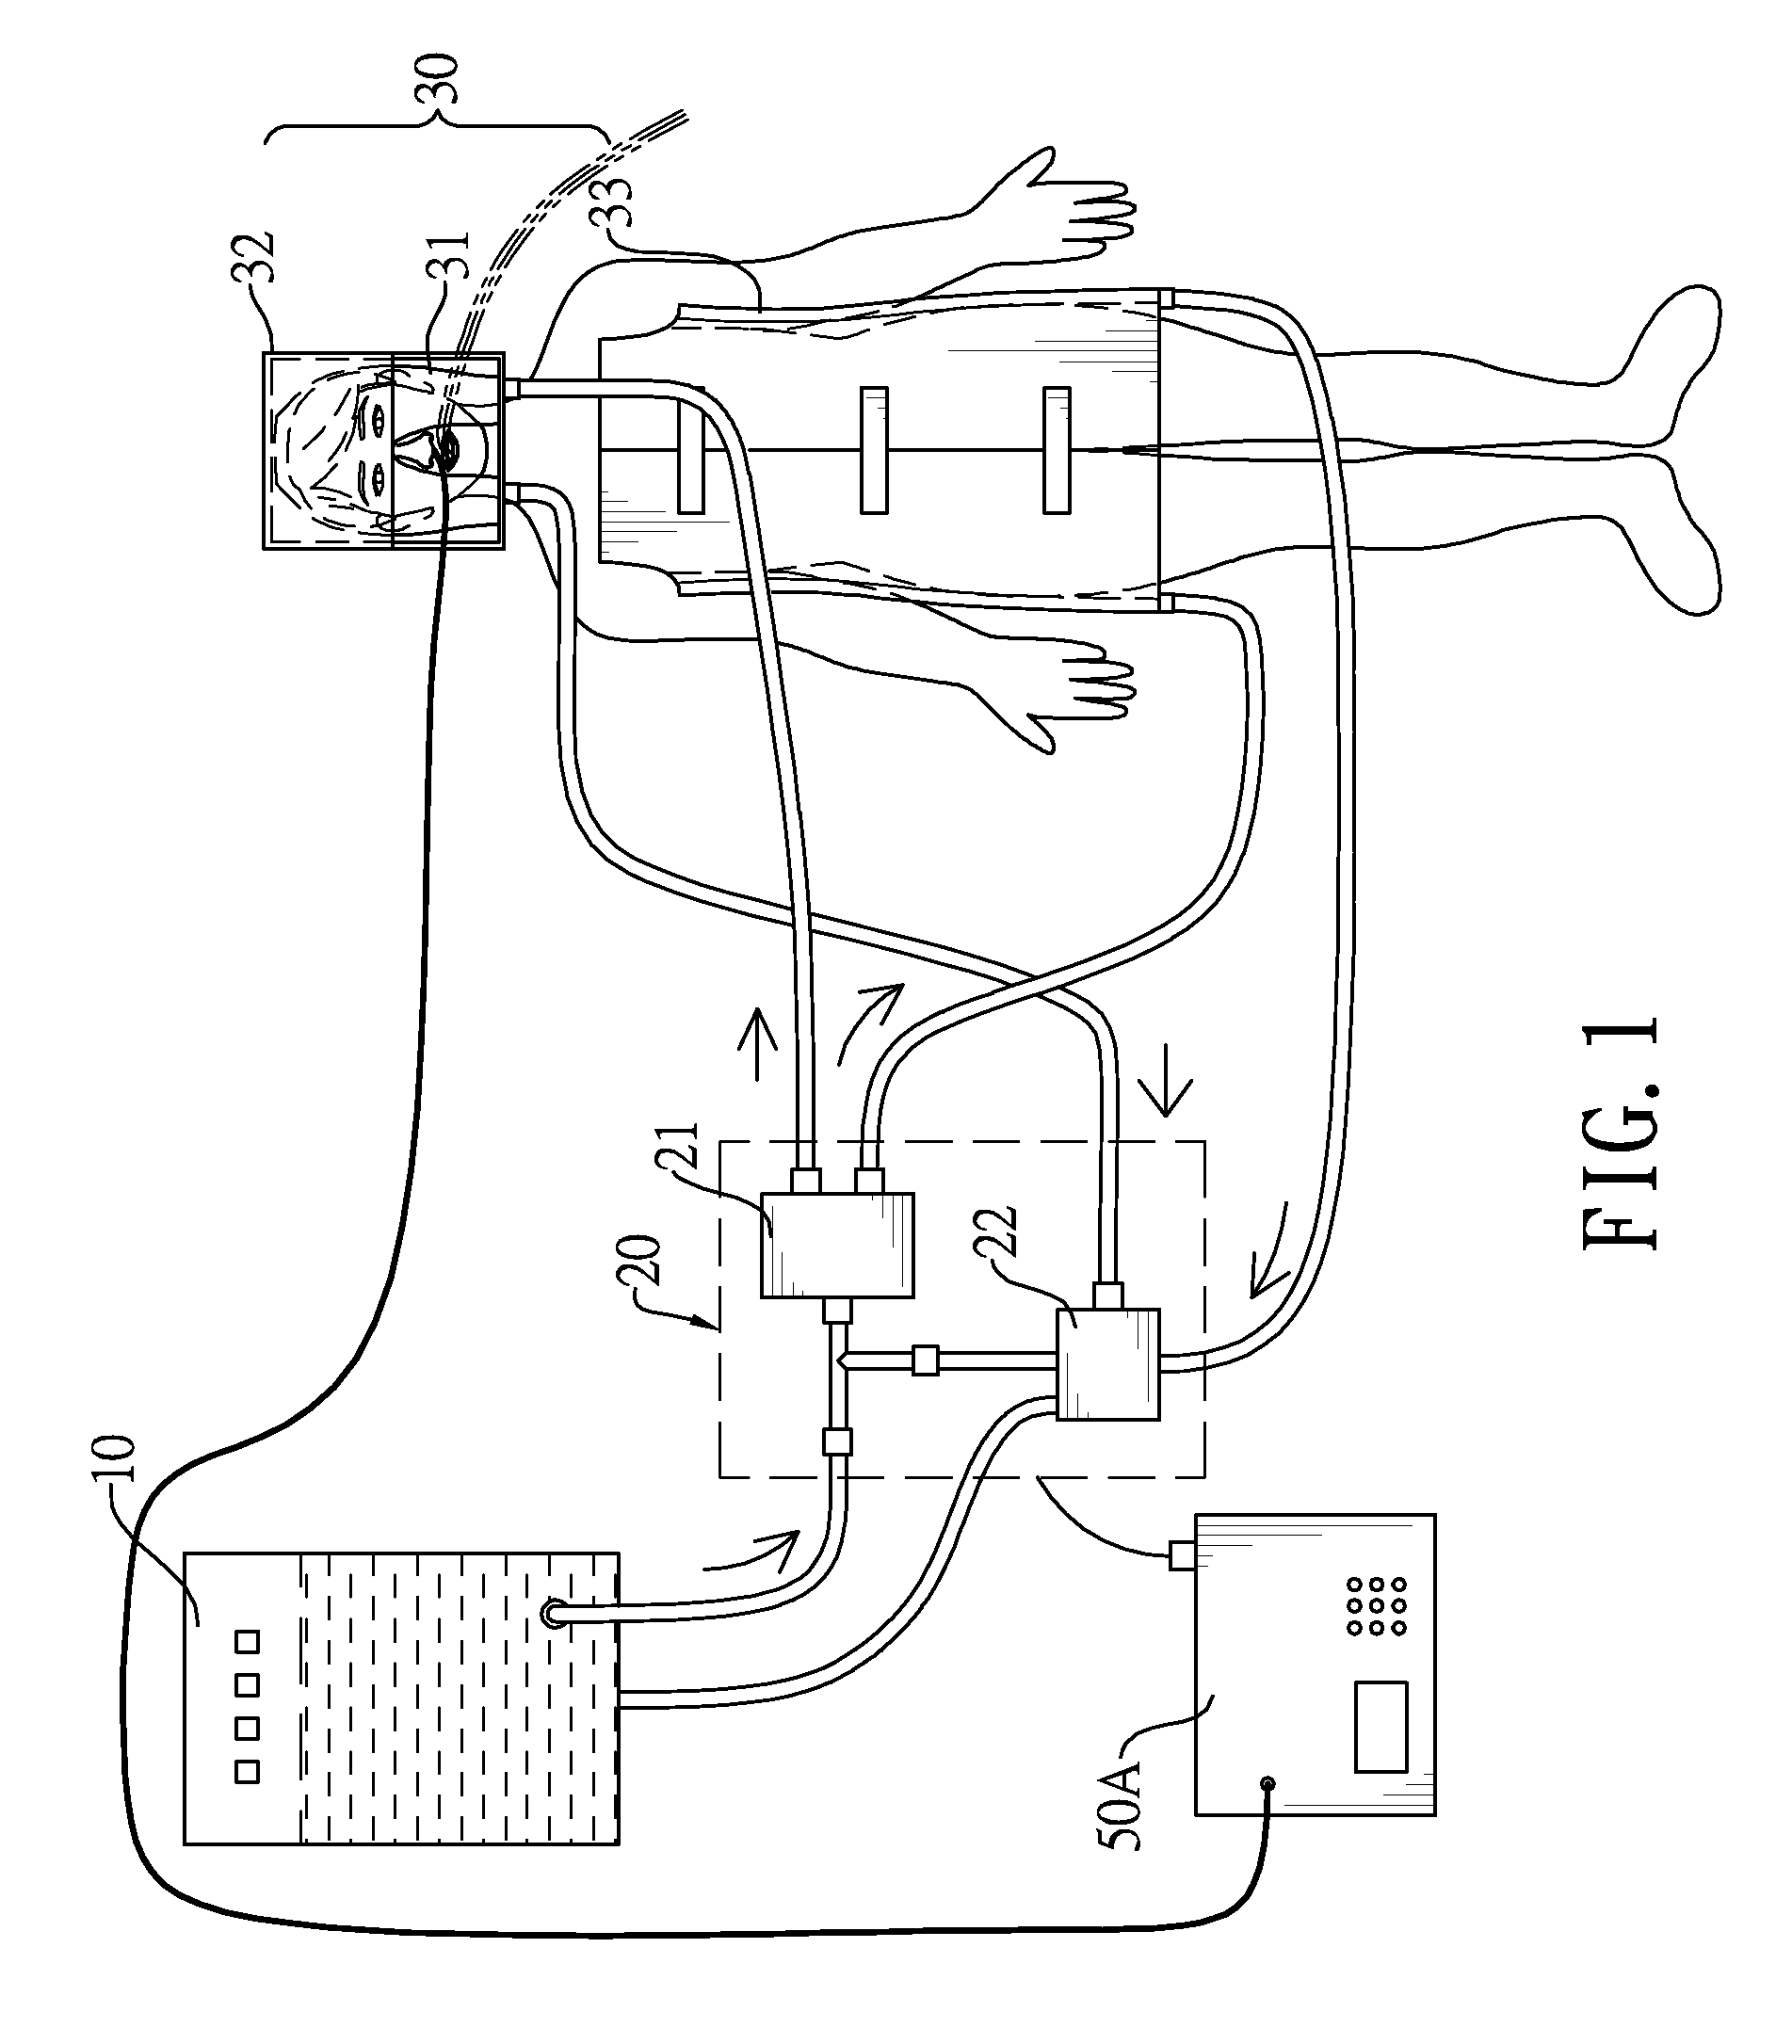 Precision-Controlled Cooling System for Inducing Diving Reflex and Achieving Safe Hypothermic Central Nervous System Protection